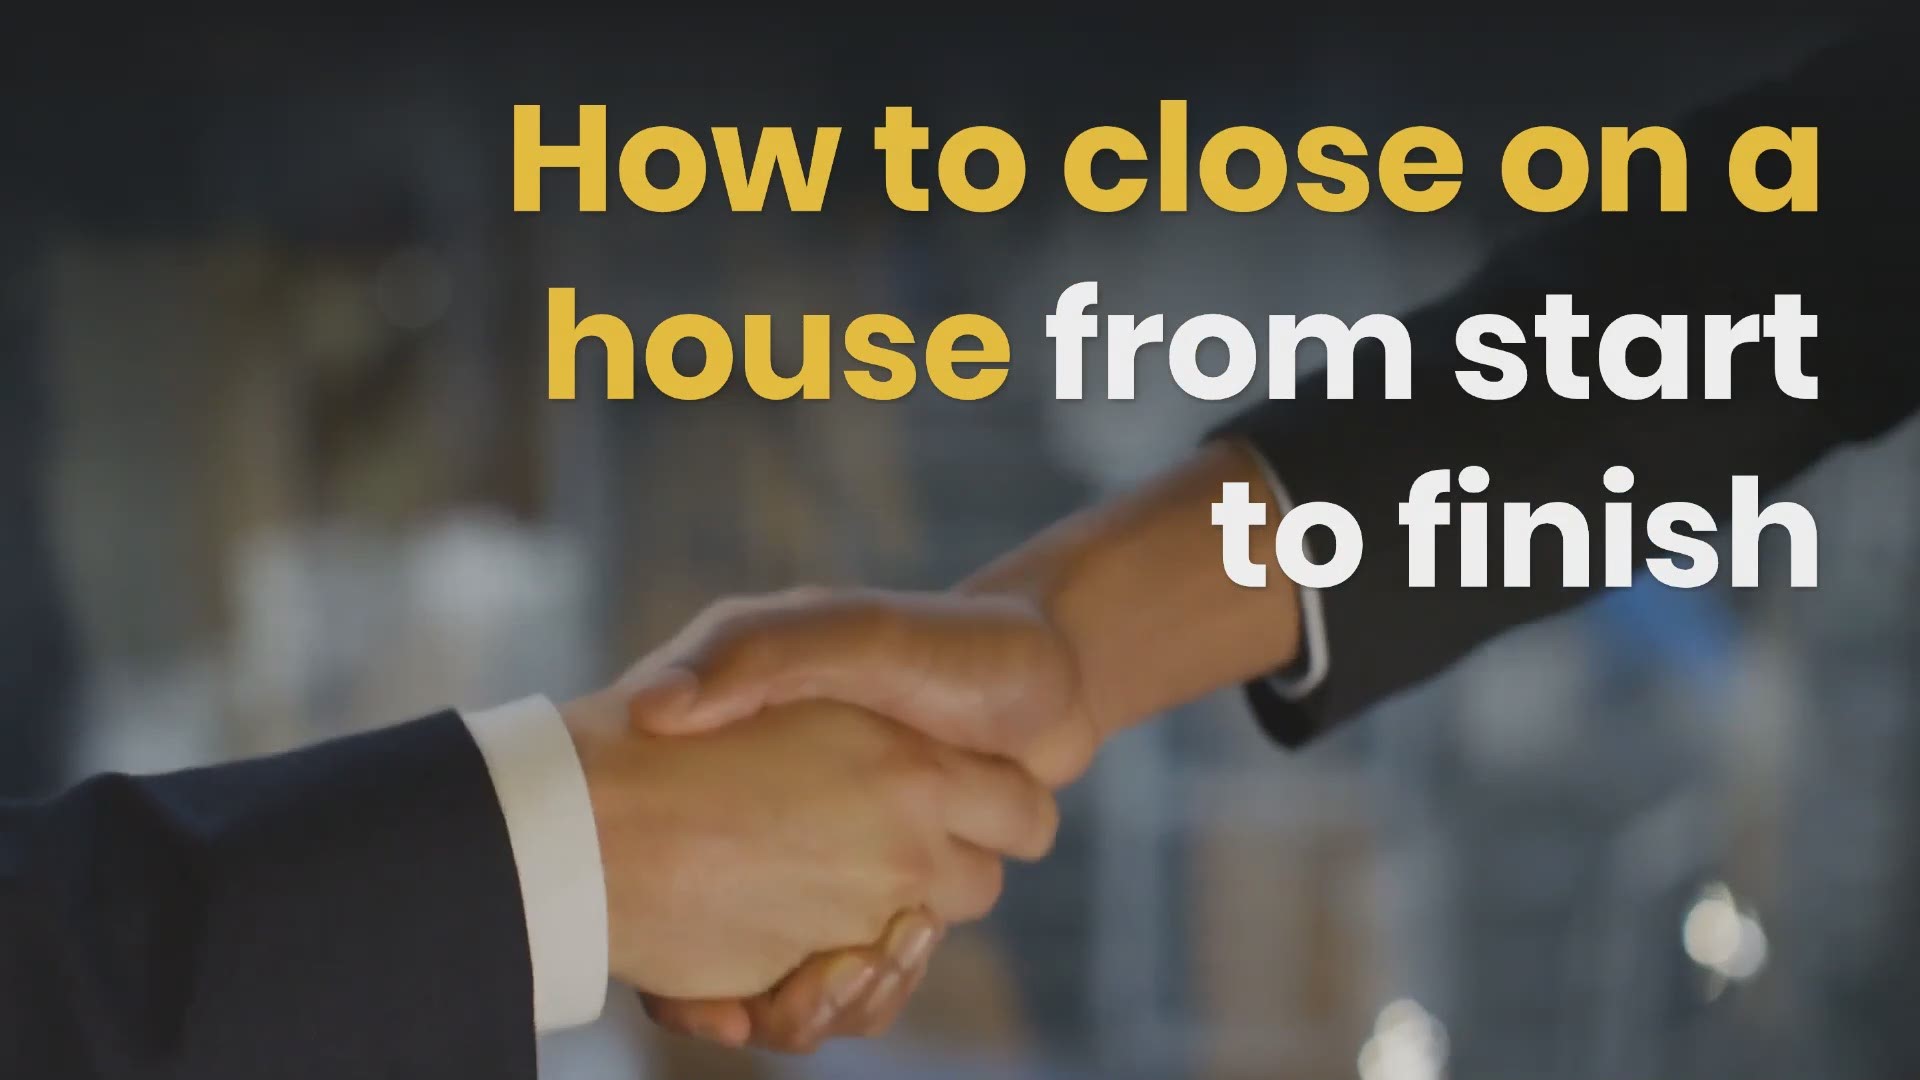 This short video will walk you through some of the steps to closing on a house in an easy to understand way.